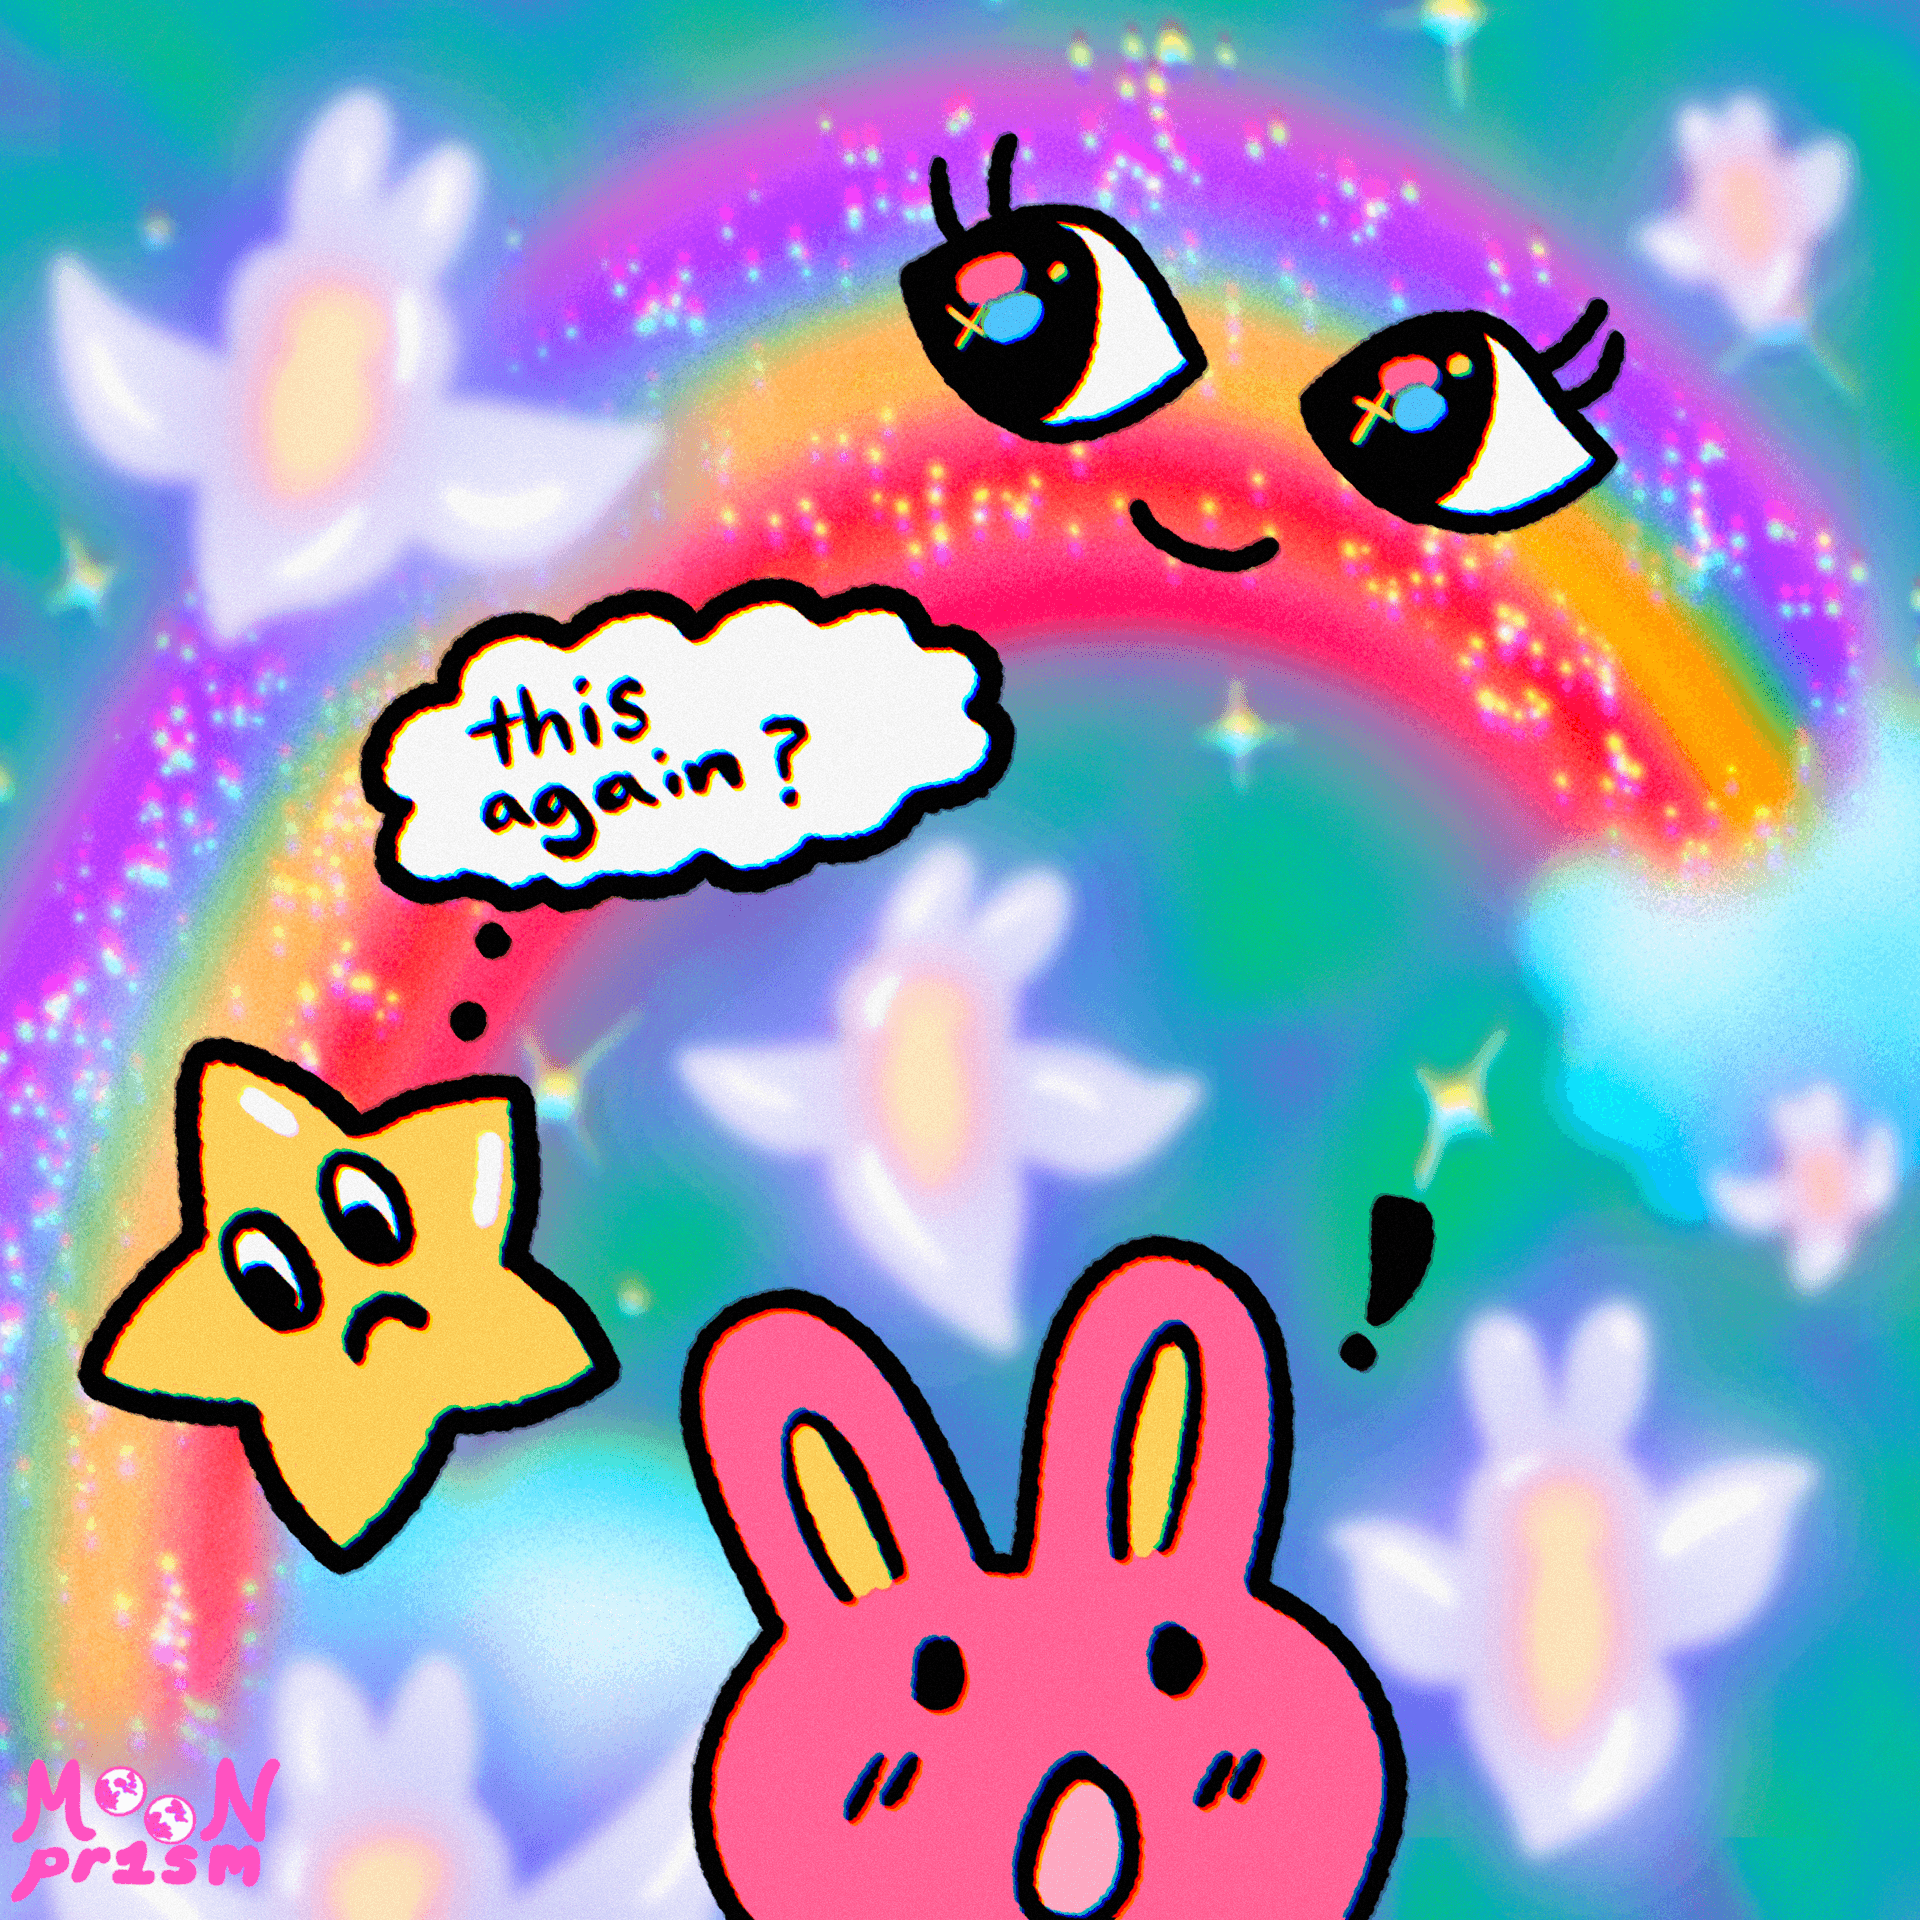 An illustration of a glittering pastel rainbow with large eyes and a smile, a surprised looking pink rabbit with an exclamation point over their head, and a frowning gold star with a thought bubble that says 'this again?'. These characters are surrounded by floating blue sea butterfly-bunny hybrid characters on a greenish-blue background. Glitter and sparkles everywhere!